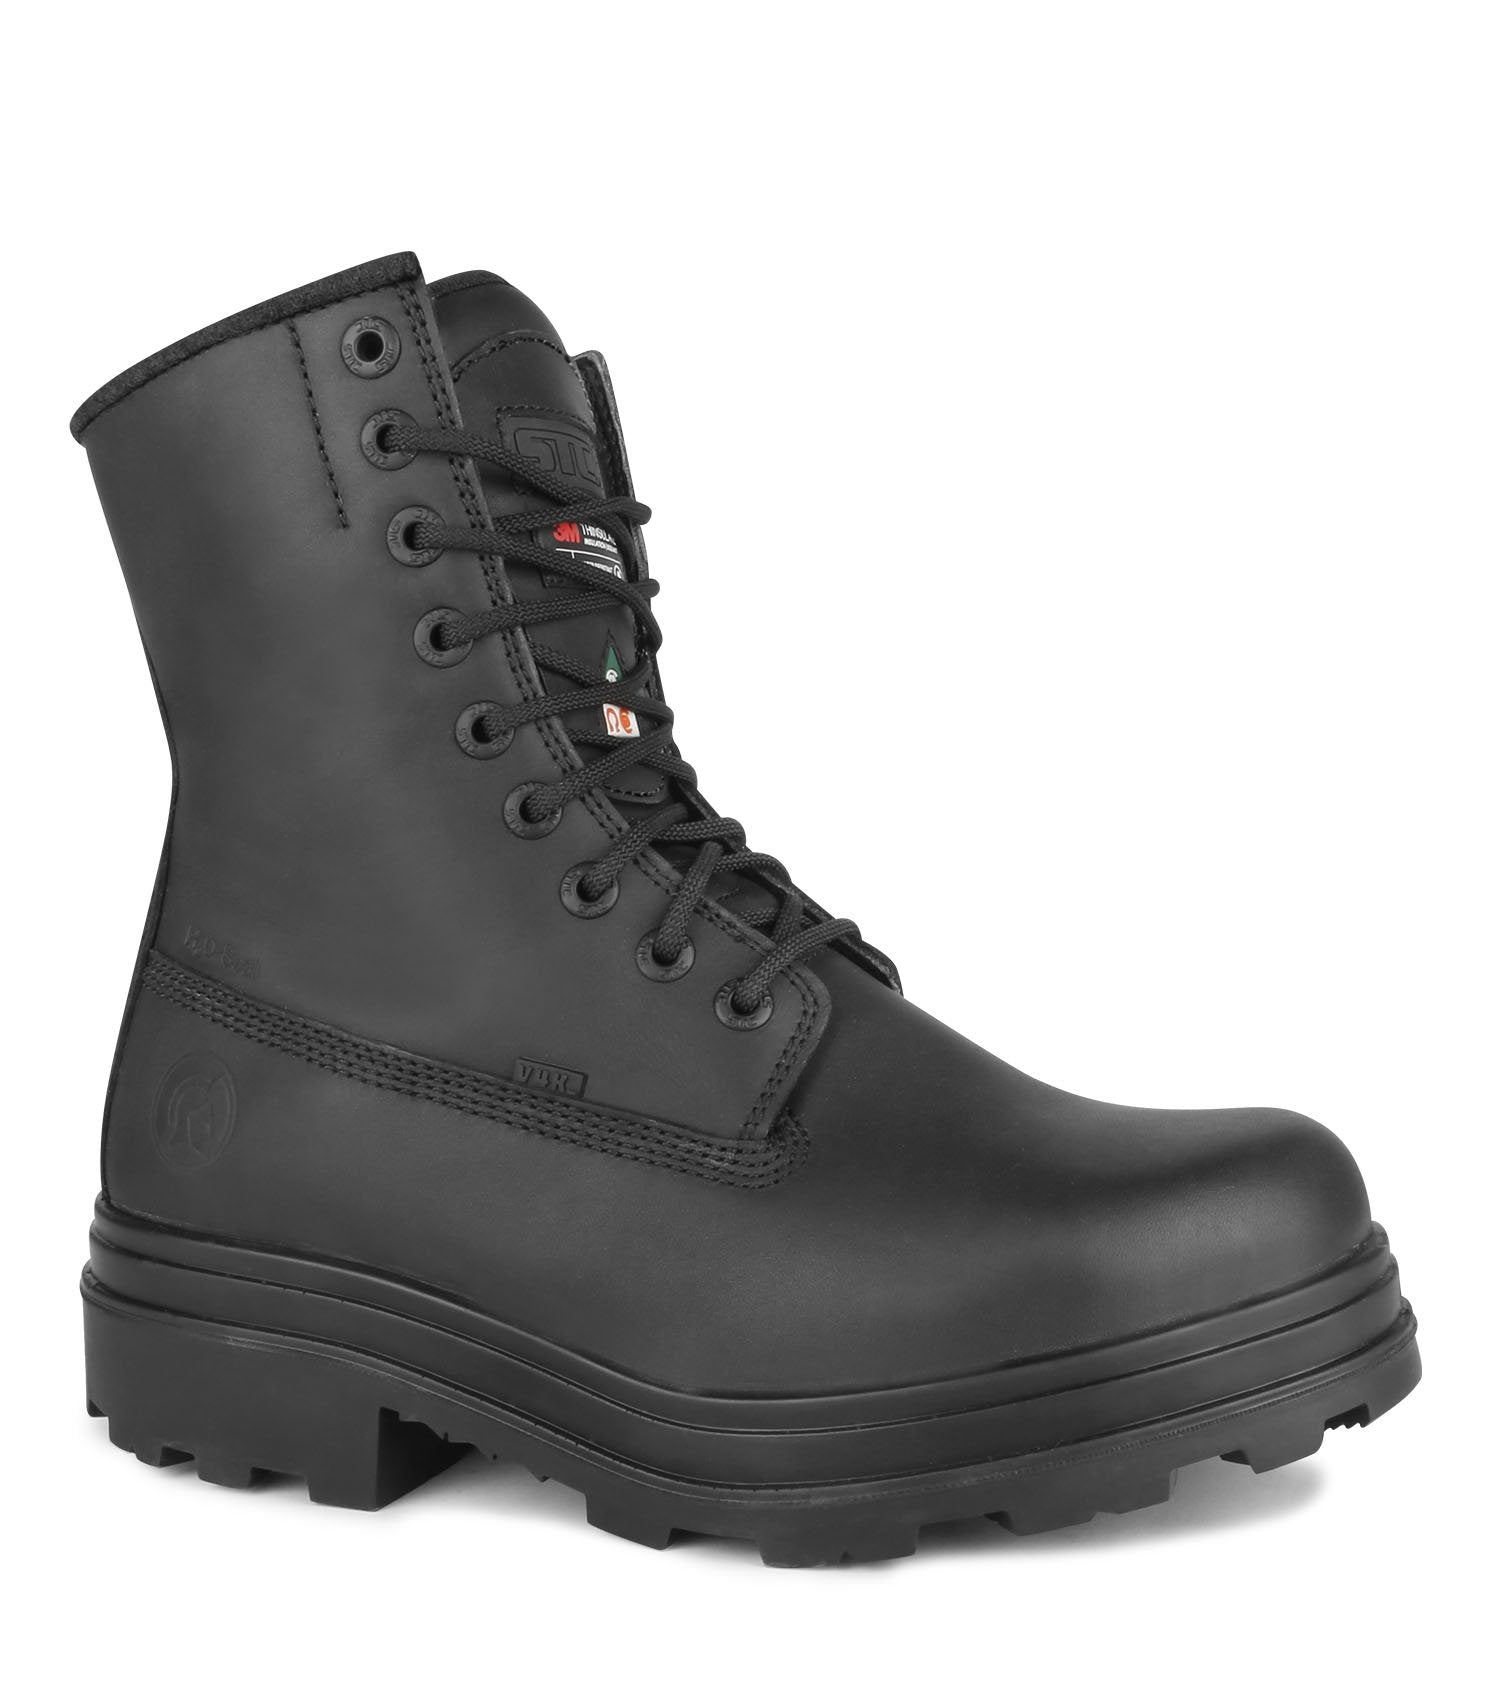 STC Blitz Side-Zip 8" Safety Boots | Black | Sizes 7 - 14 Work Boots - Cleanflow